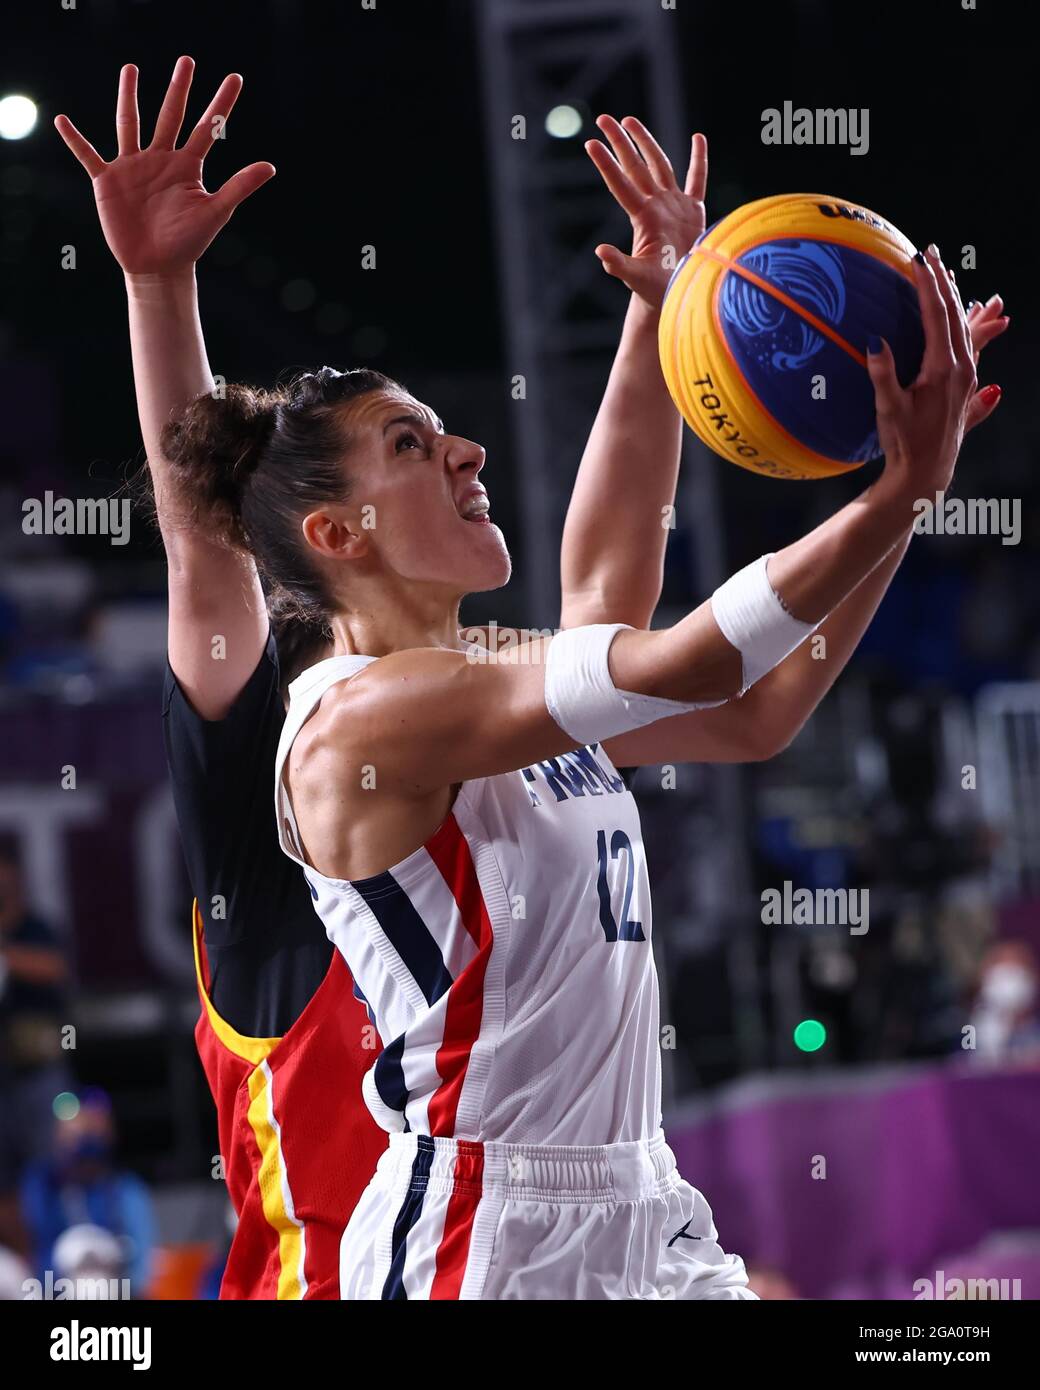 Tokyo, Japan. 28th July, 2021. Laetitia Guapo of France competes during the Tokyo 2020 women's 3x3 basketball bronze medal match between China and France in Tokyo, Japan, July 28, 2021. Credit: Lan Hongguang/Xinhua/Alamy Live News Stock Photo